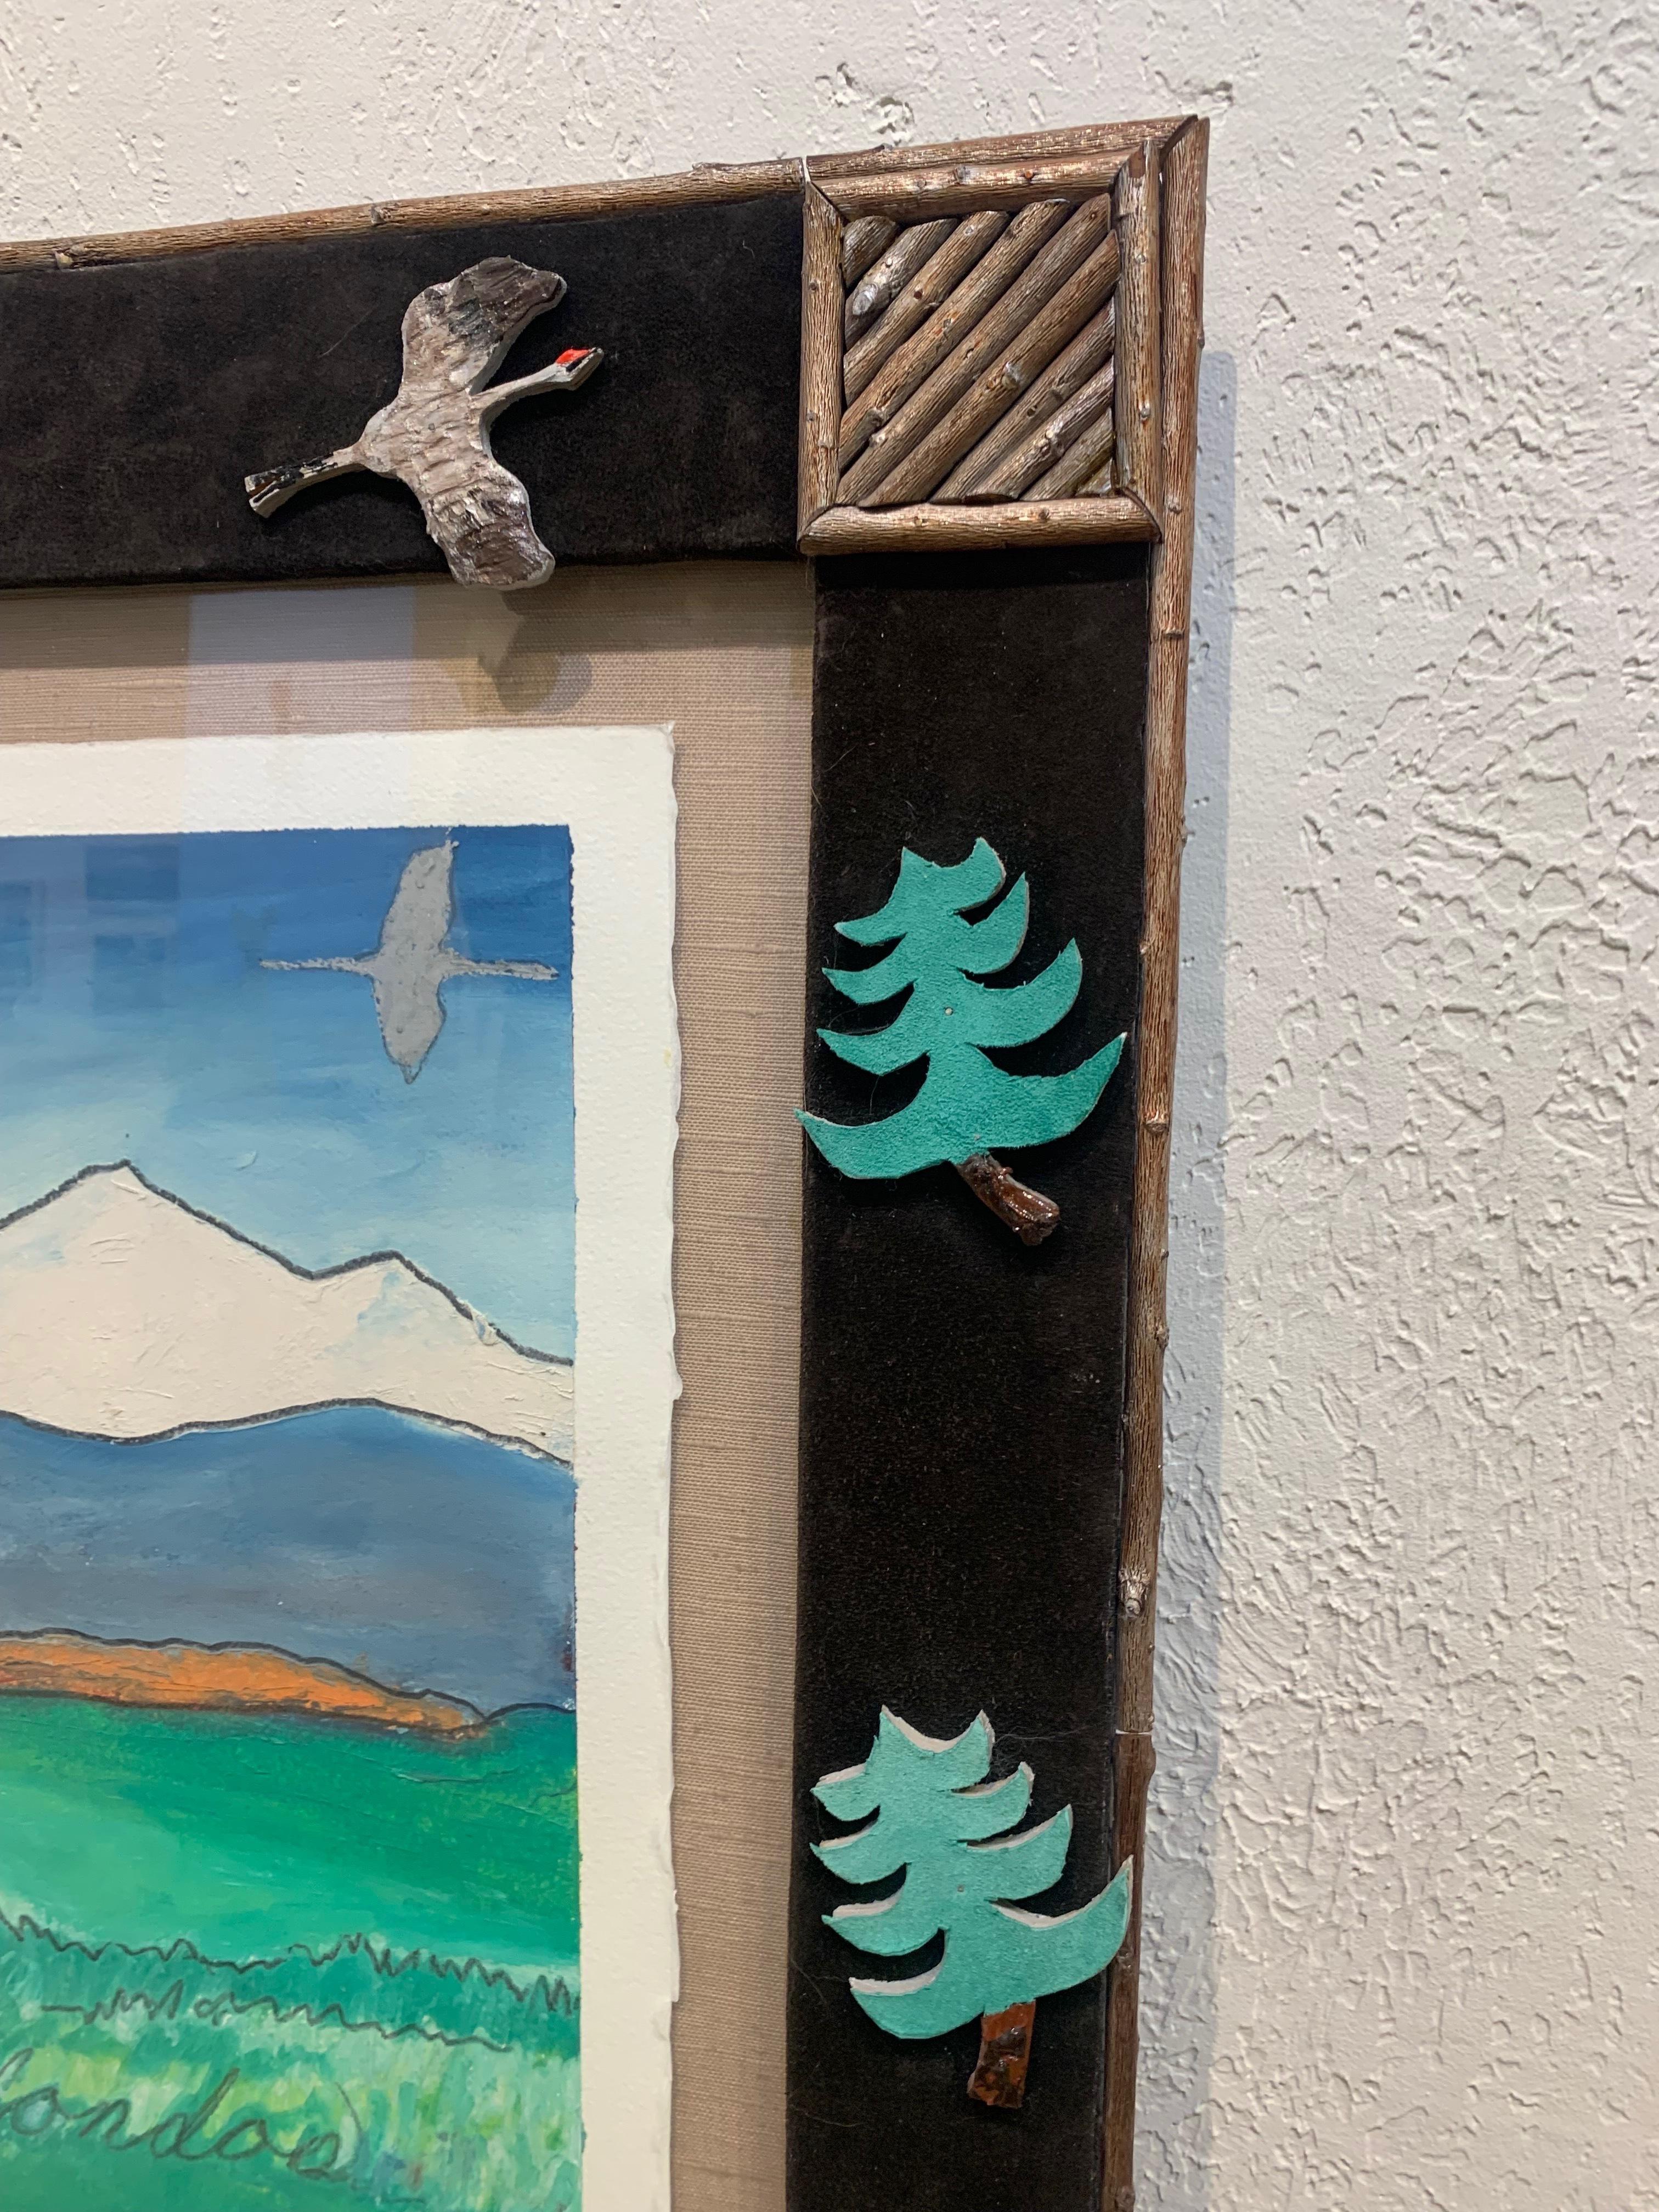 This is a painting on paper, using cattlemarkers, with a unique, handmade frame by a local Bozeman crafter. Jennifer Lowe has combined the landscapes, animals and the people of her native Montana with a unique approach to painting.

Born in